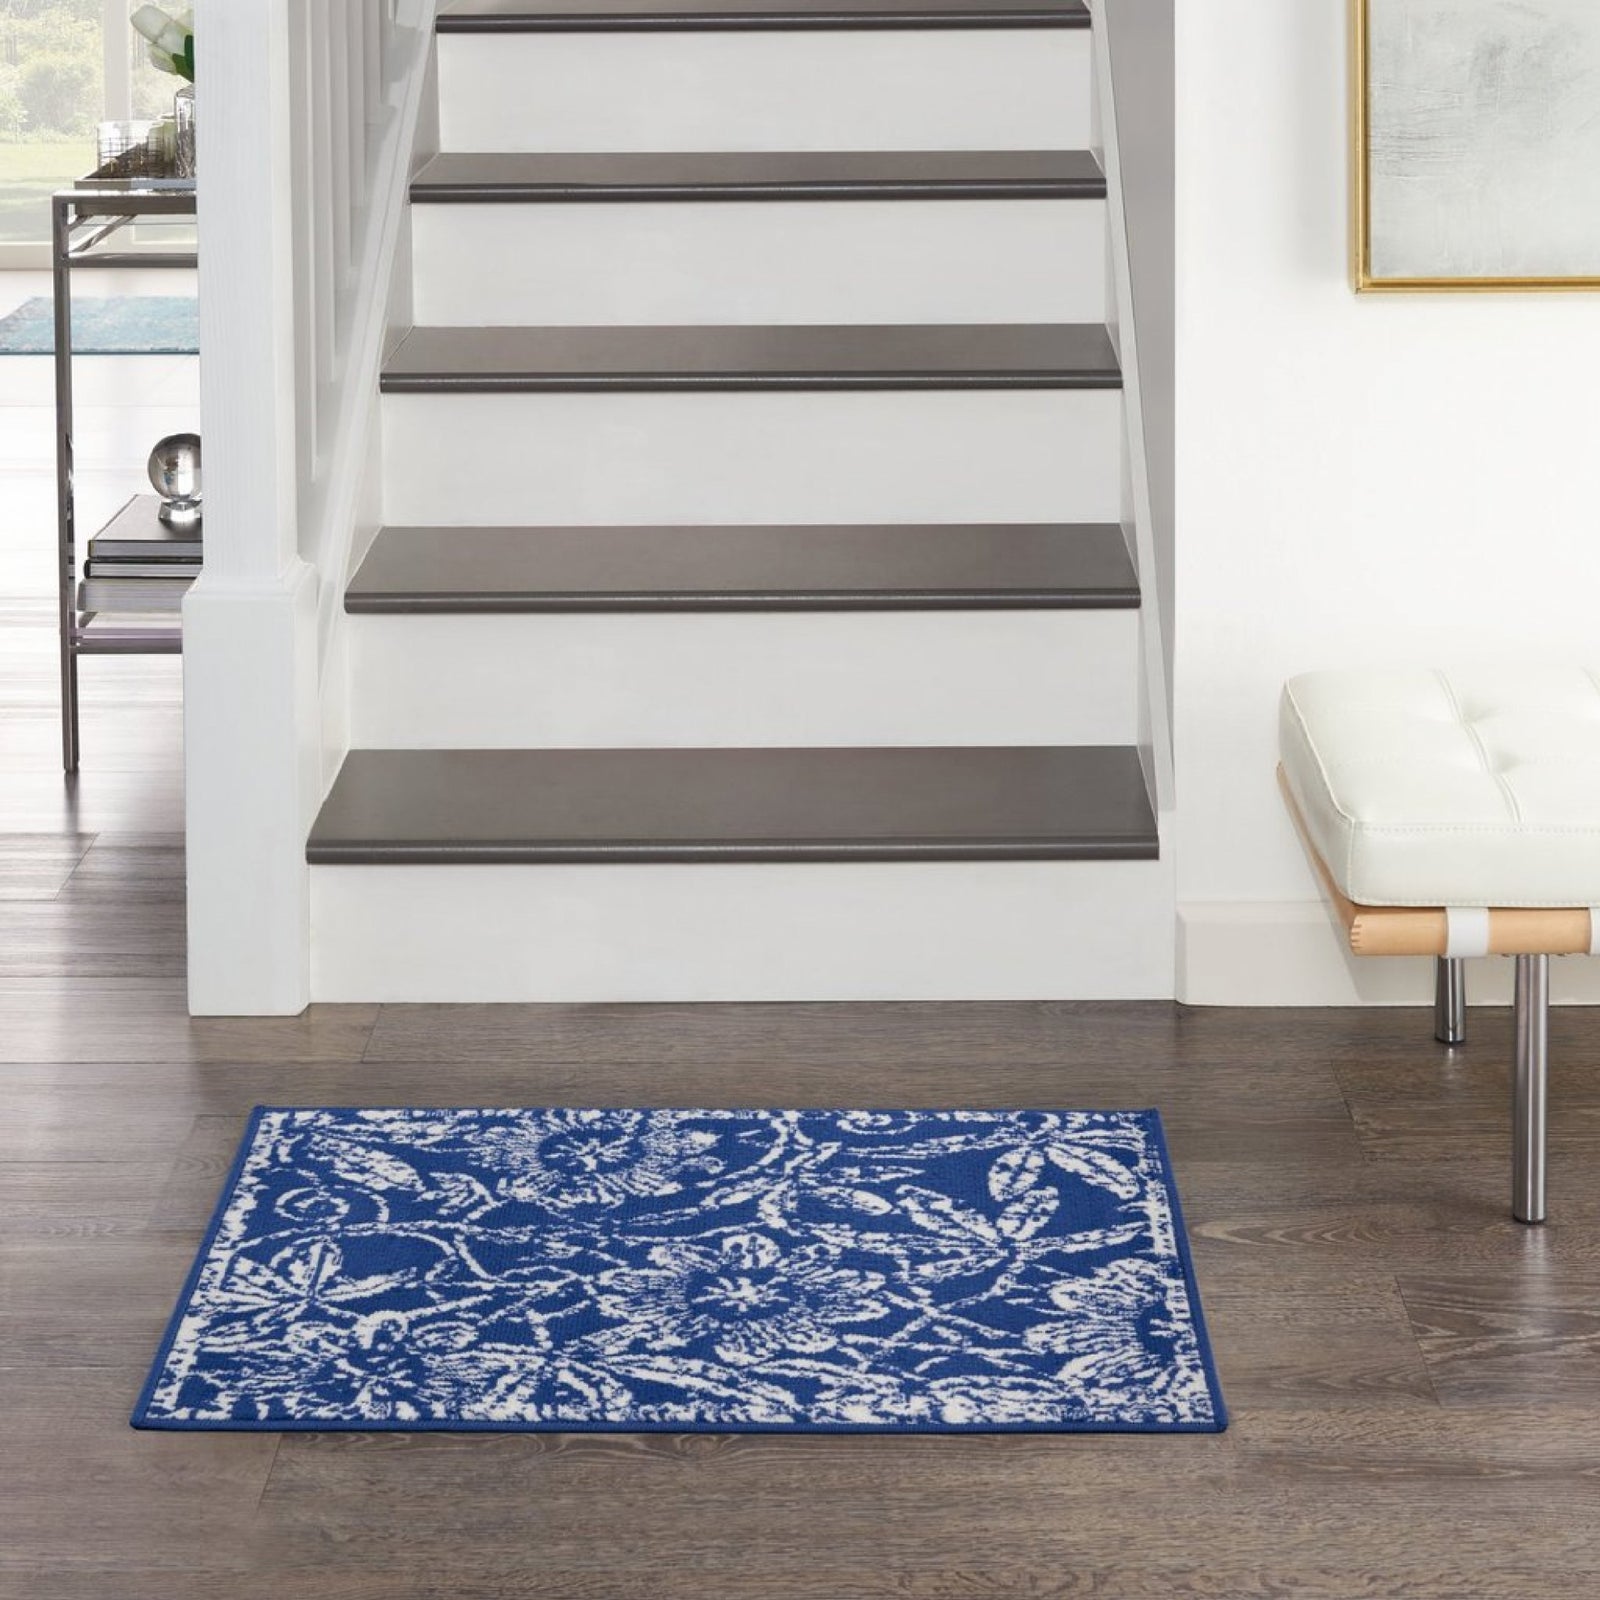 5’ X 7’ Navy And Ivory Floral Vines Area Rug